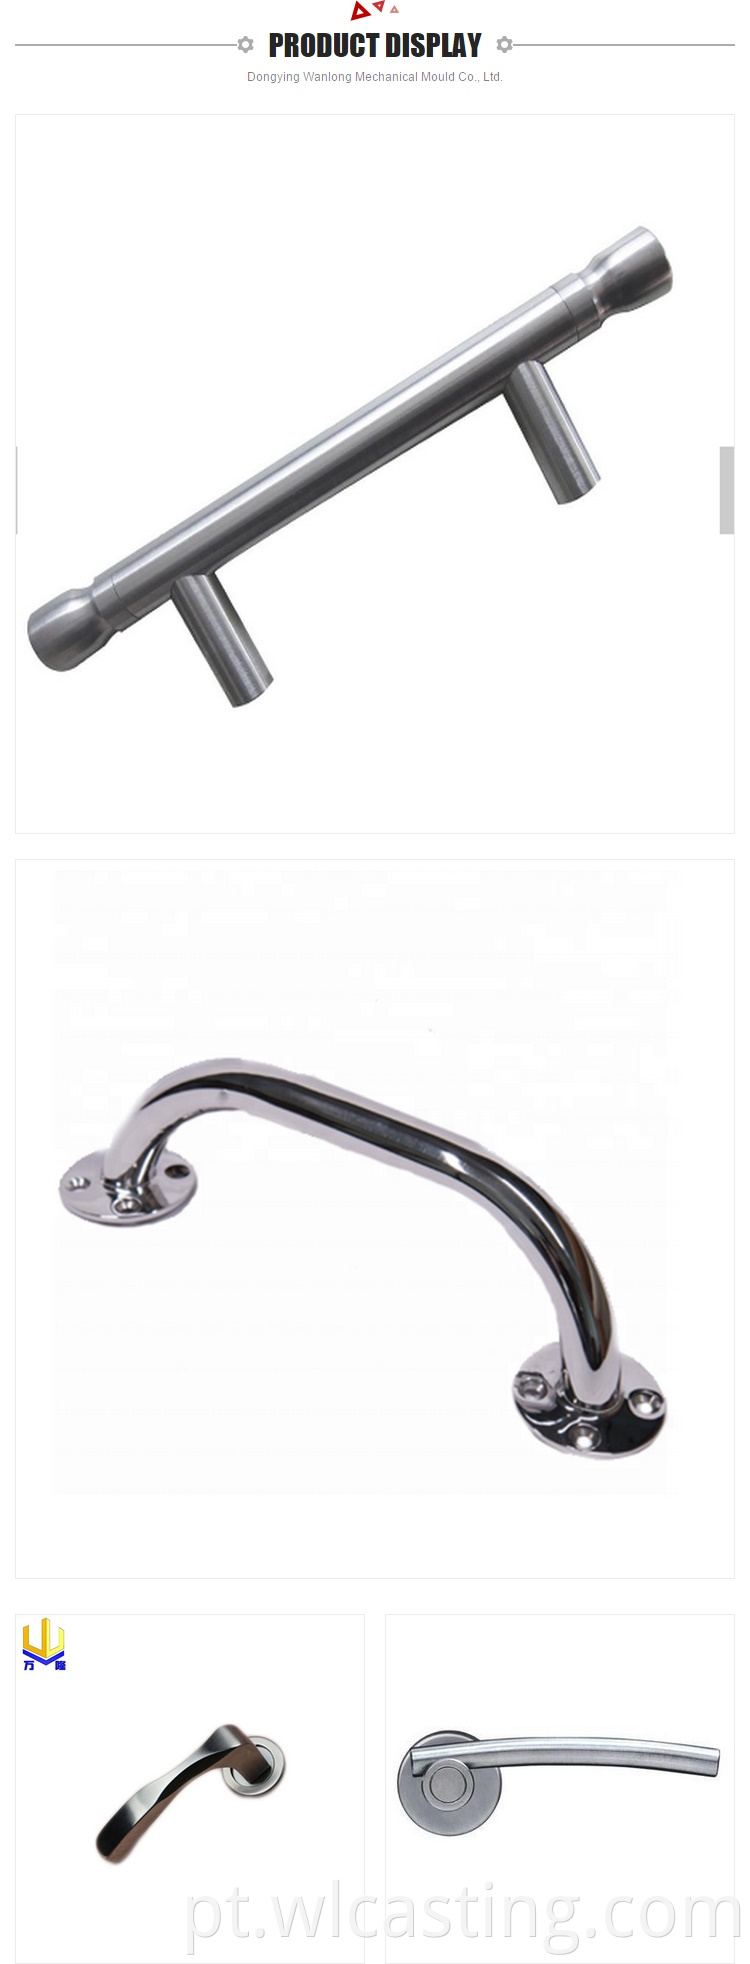 stainless steel mirror polish brush handle pull investment casting machining